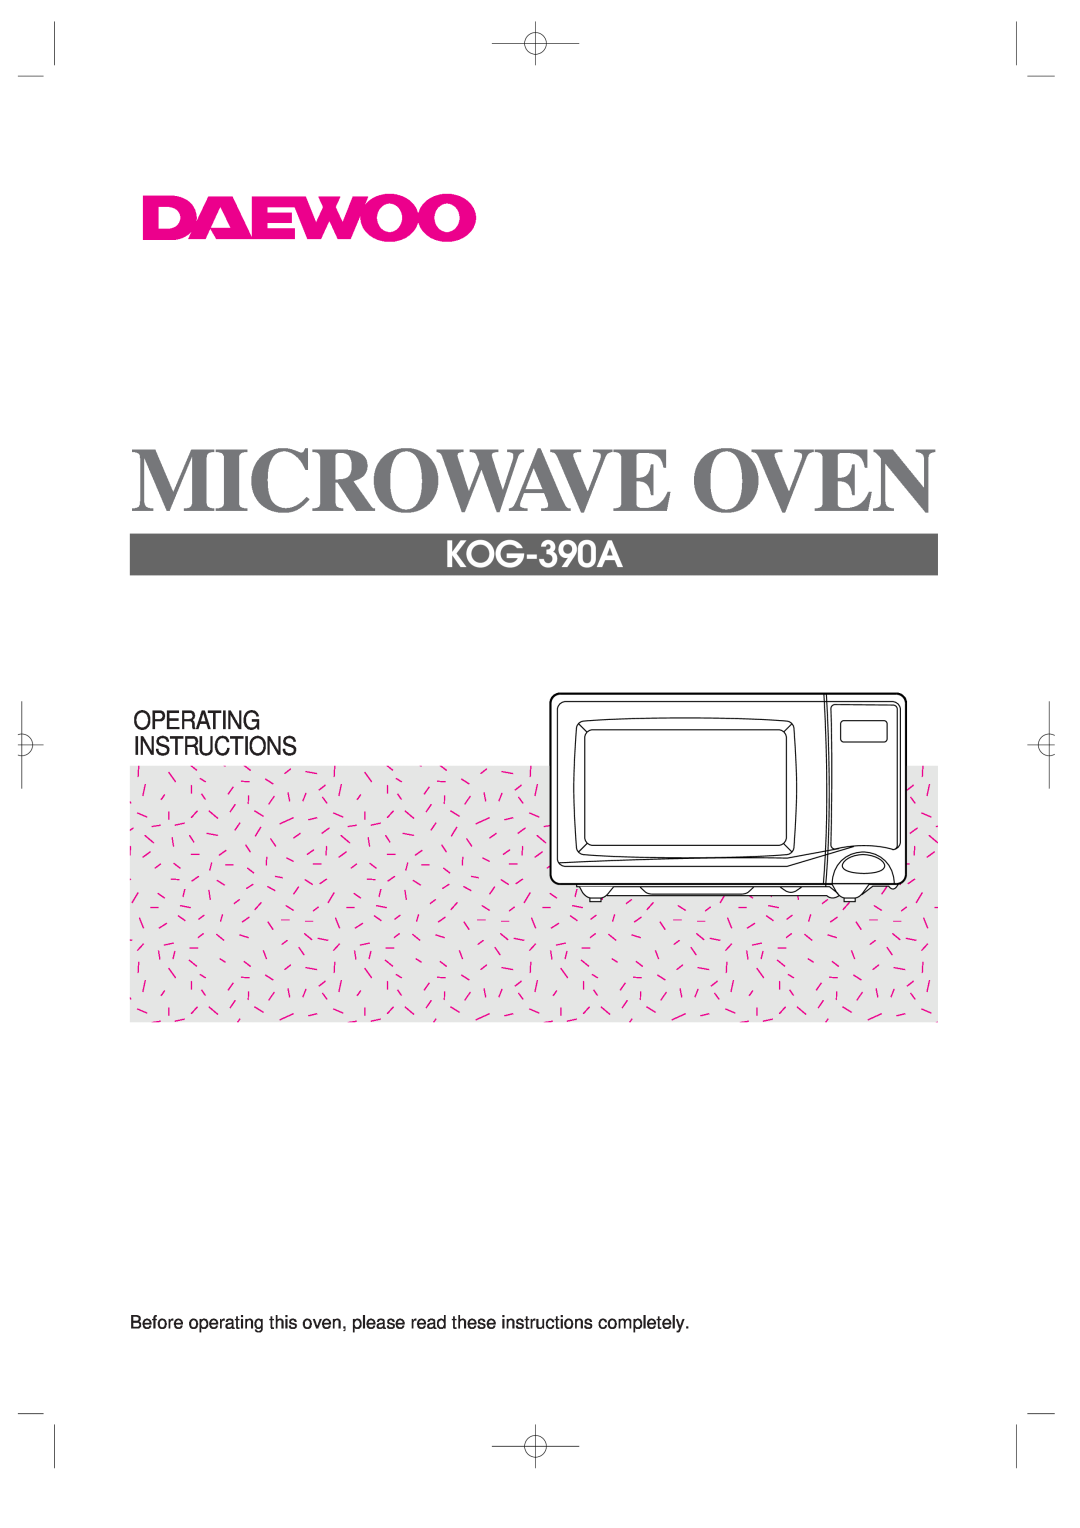 Daewoo KOG-390A manual Microwave Oven, Operating Instructions 